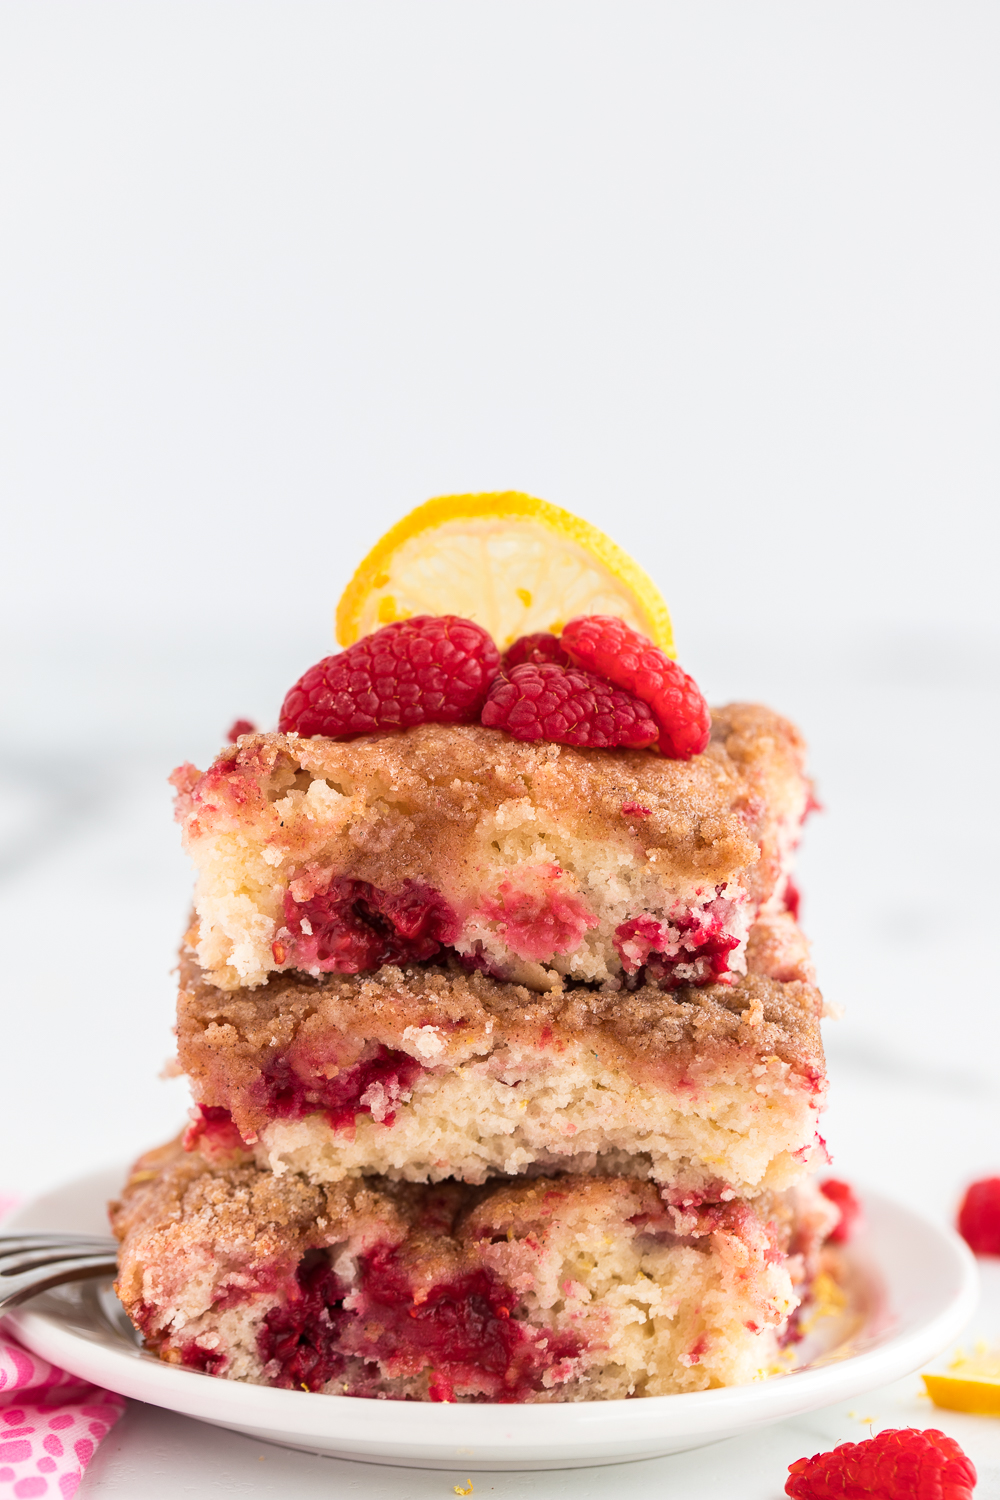 Lemon Raspberry Buckle Cake is a delicious and flavorful berry filled cake that is topped with a yummy crumb topping.  Great served for breakfast or with a scoop of vanilla ice cream for dessert.